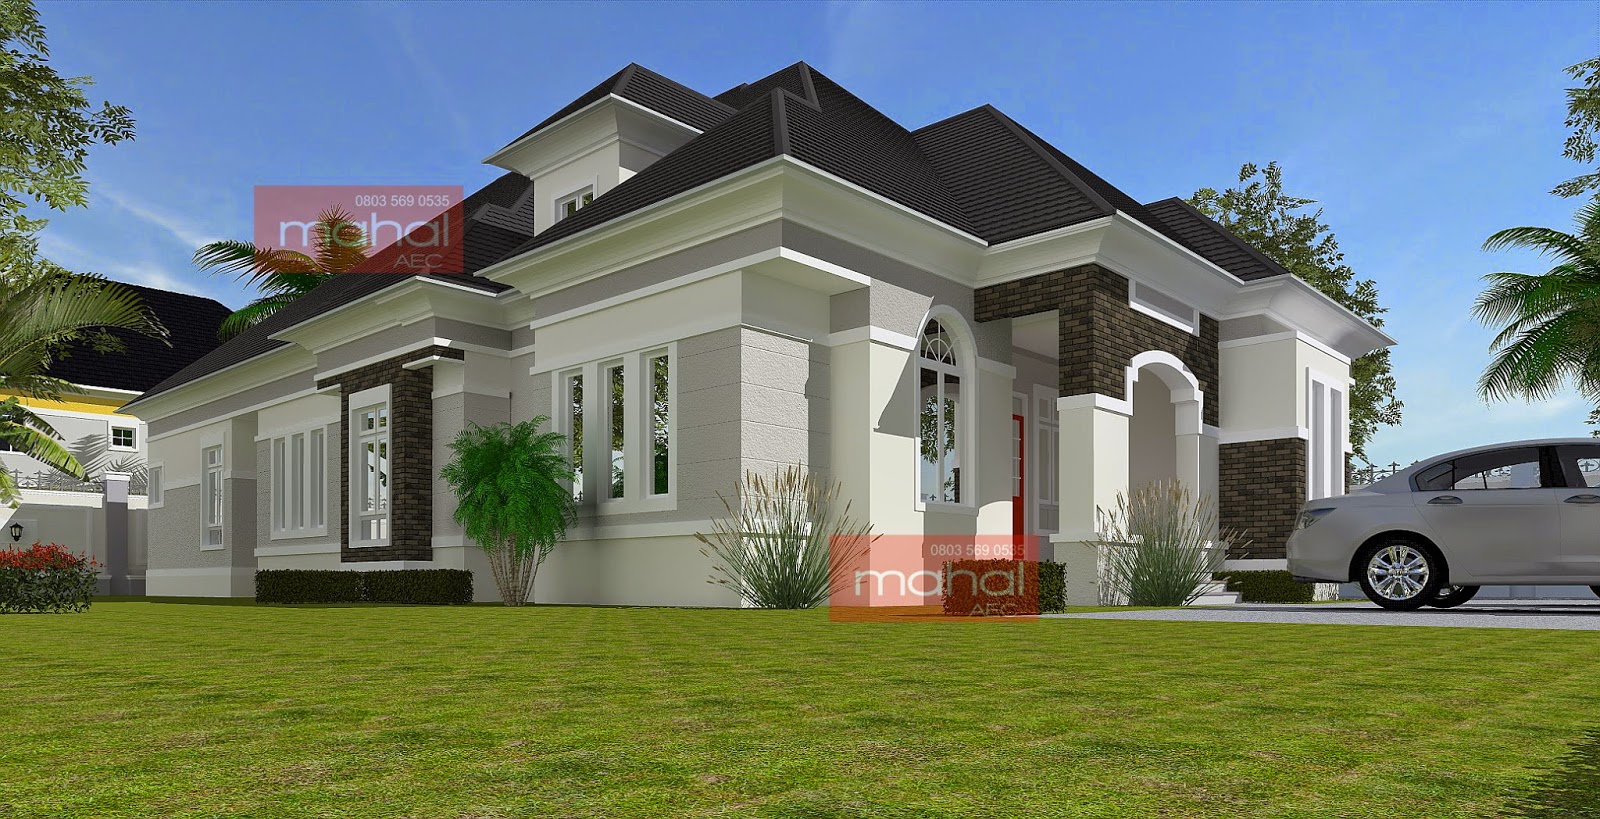 Beautiful Bungalow  Houses In Nigeria  Modern House 